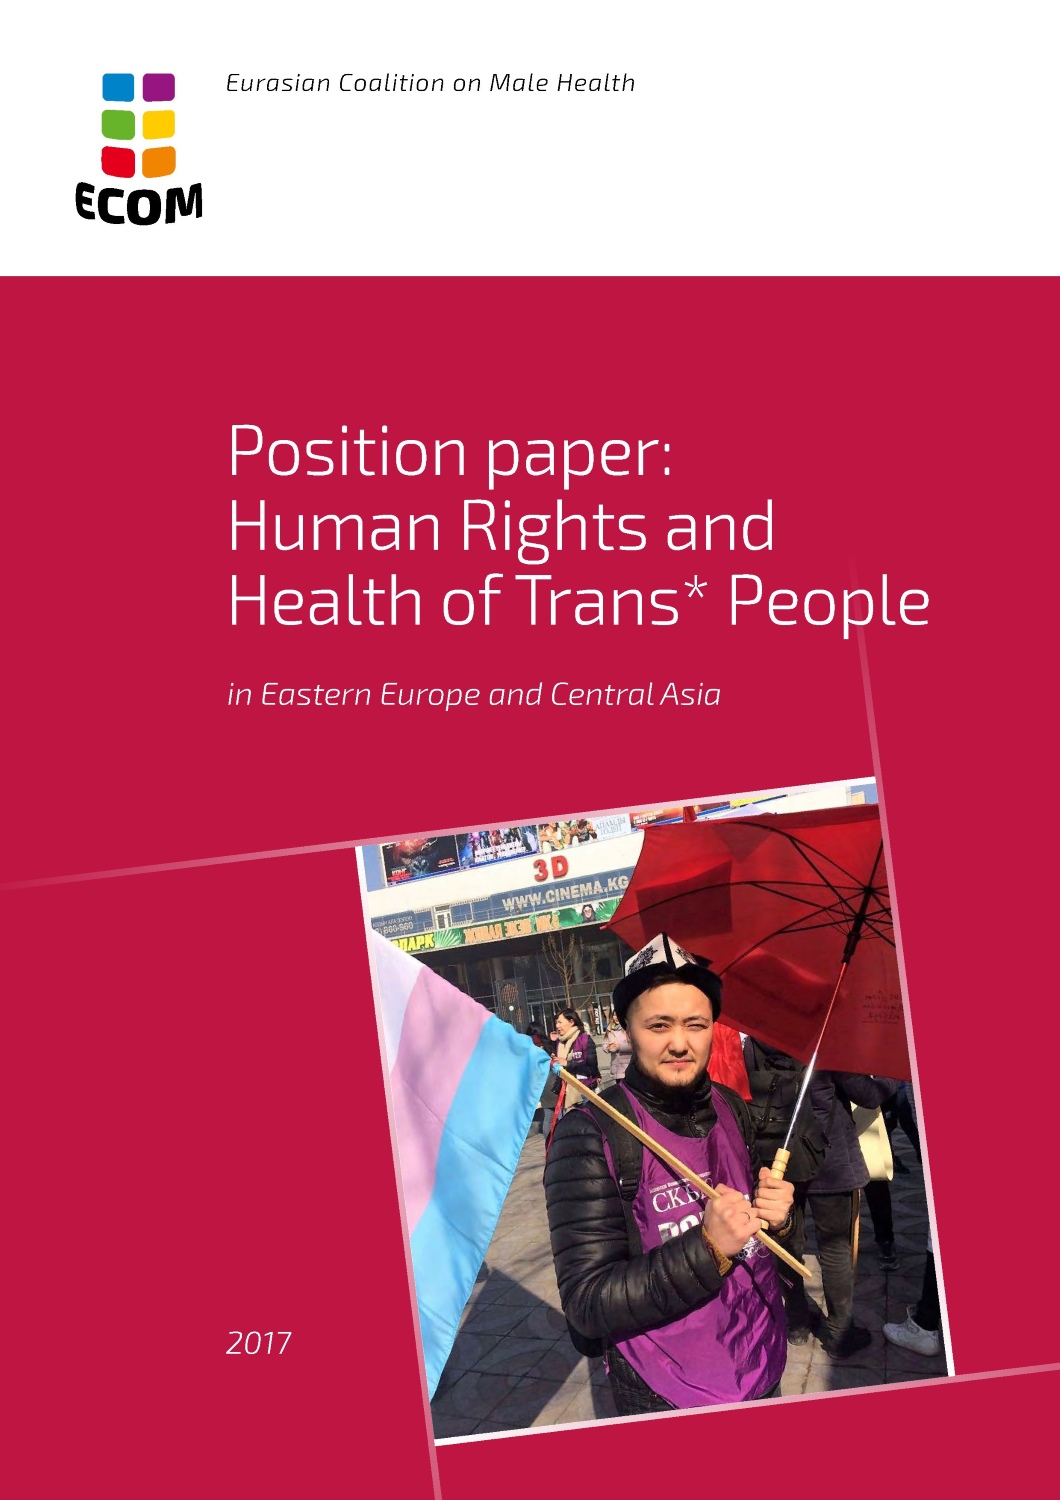 Human Rights and Health of Trans* People in EECA - position paper